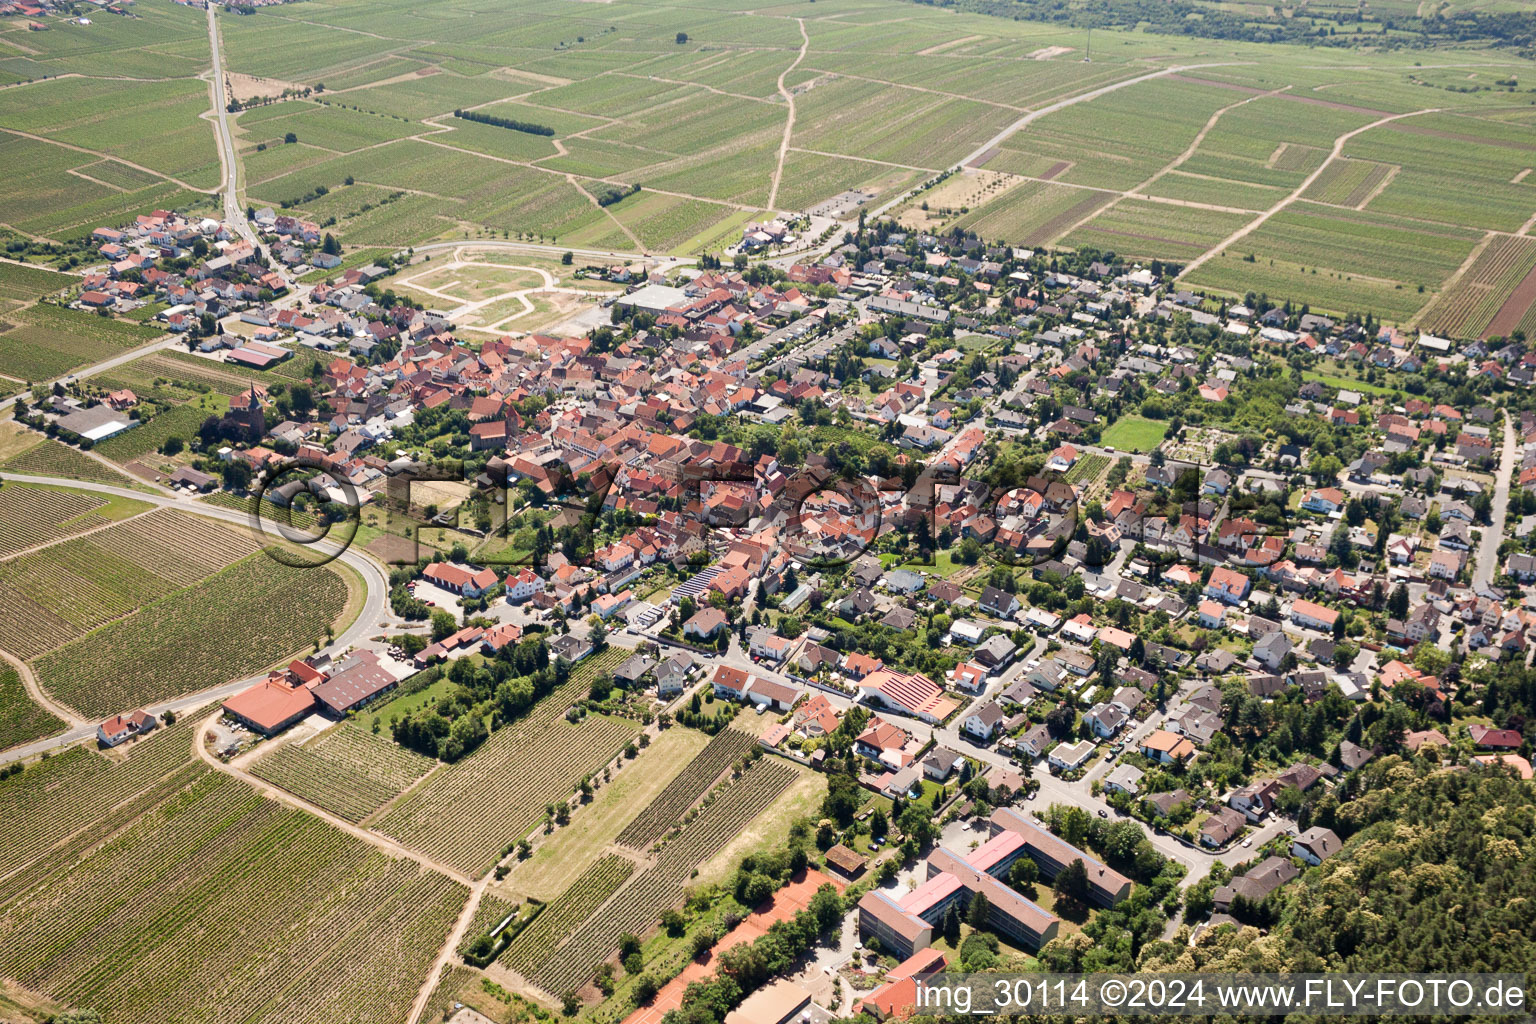 Aerial view of Village view of Am Muenchberg in Bobenheim am Berg in the state Rhineland-Palatinate